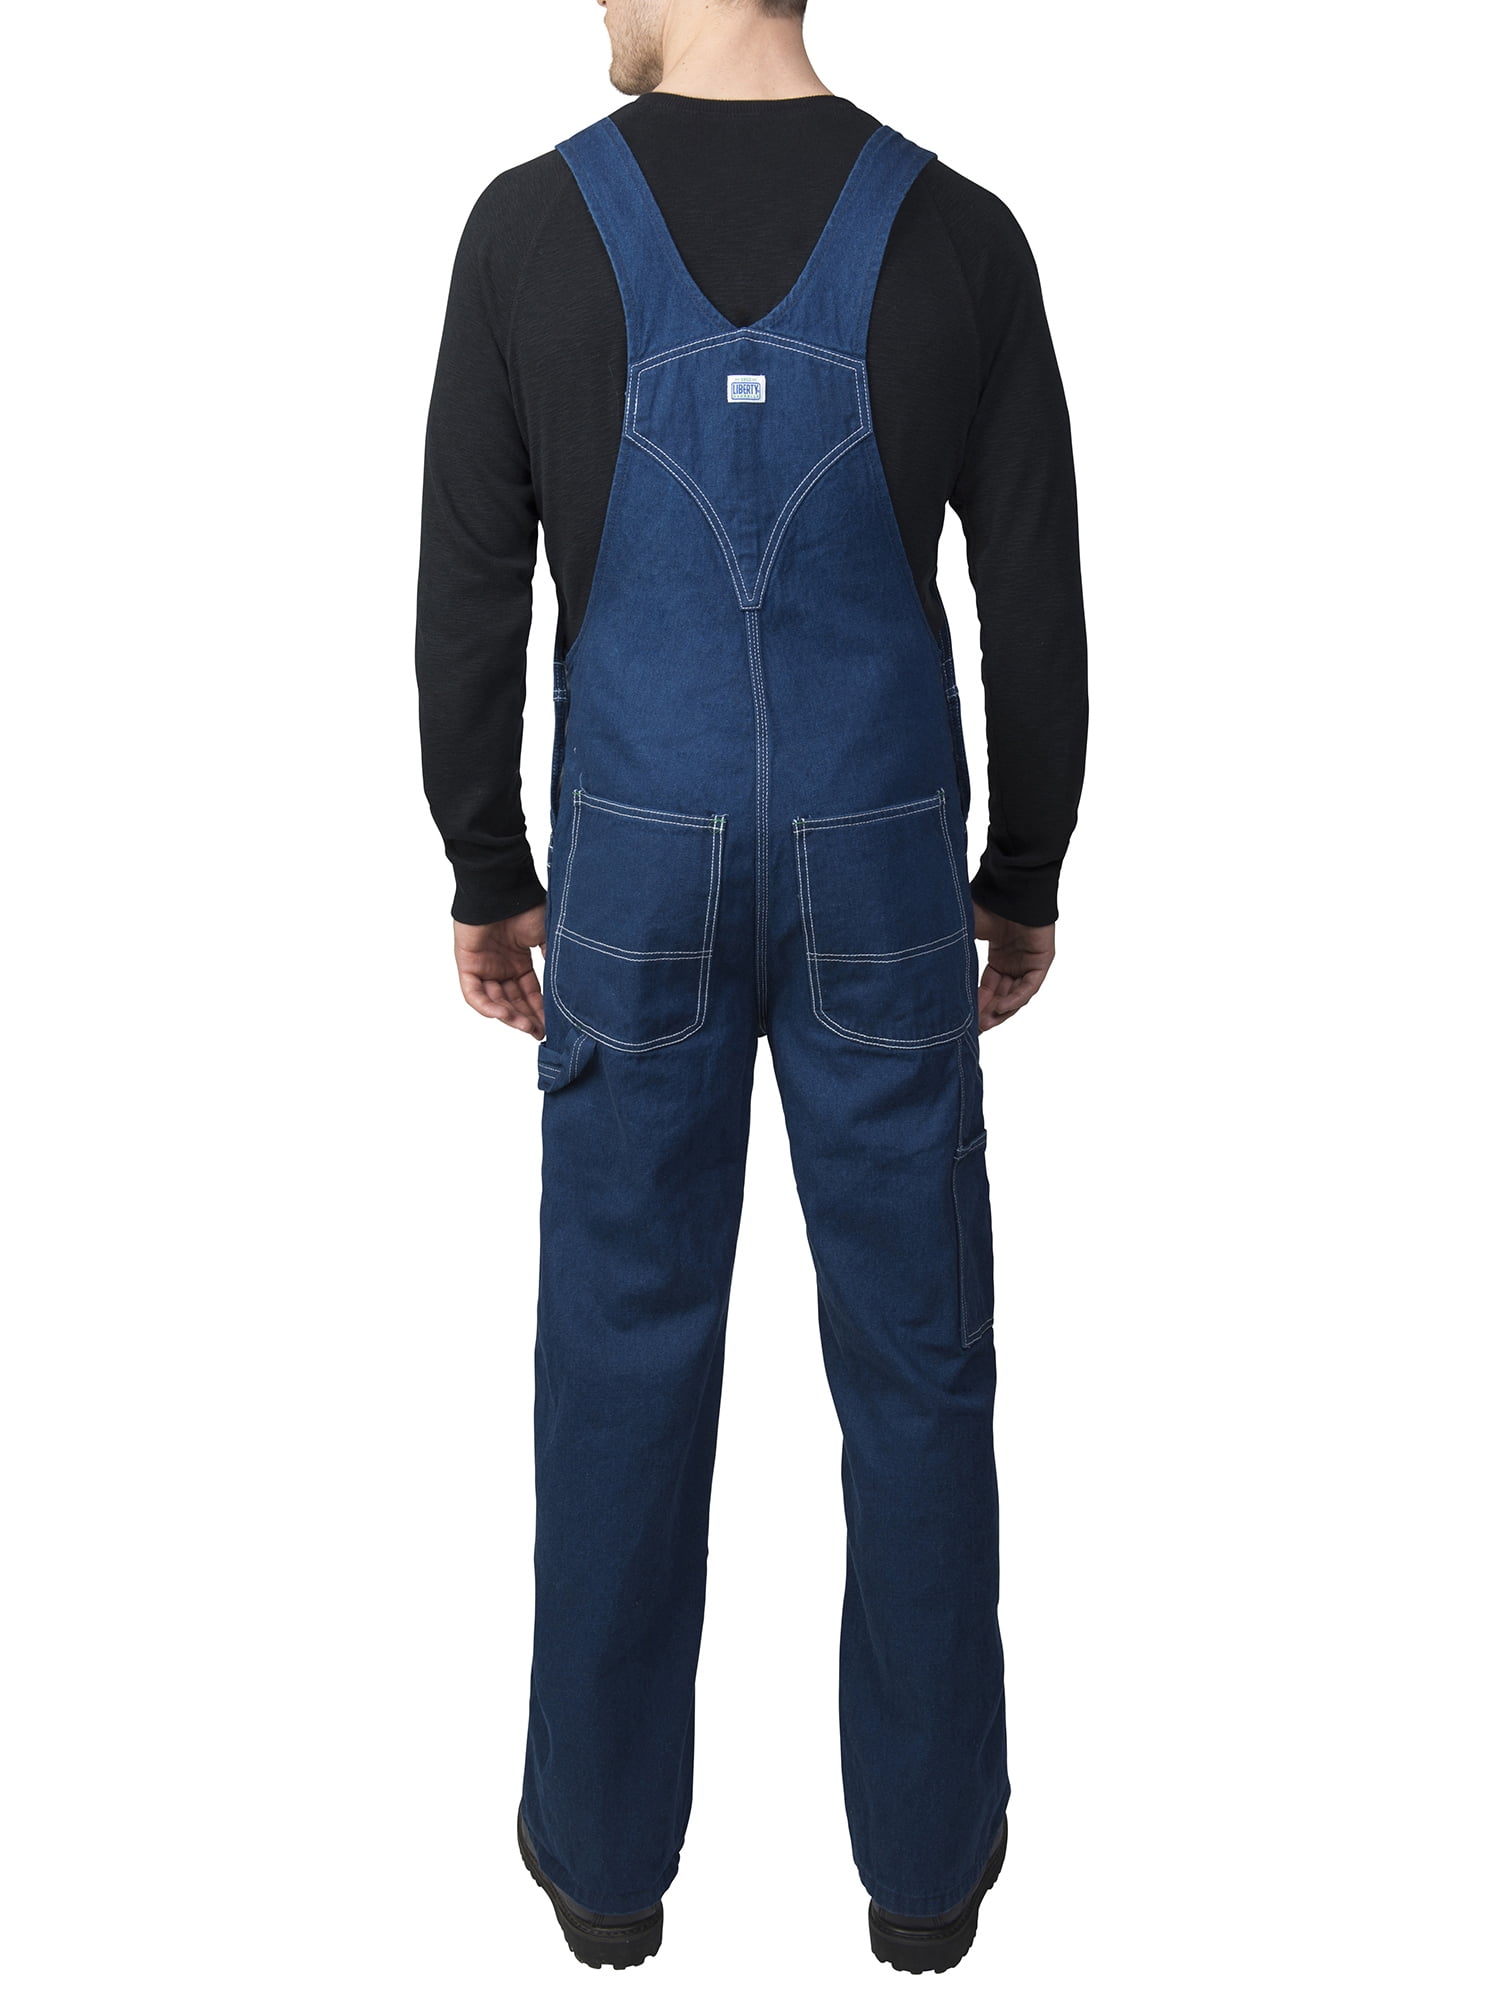 tractor supply liberty overalls